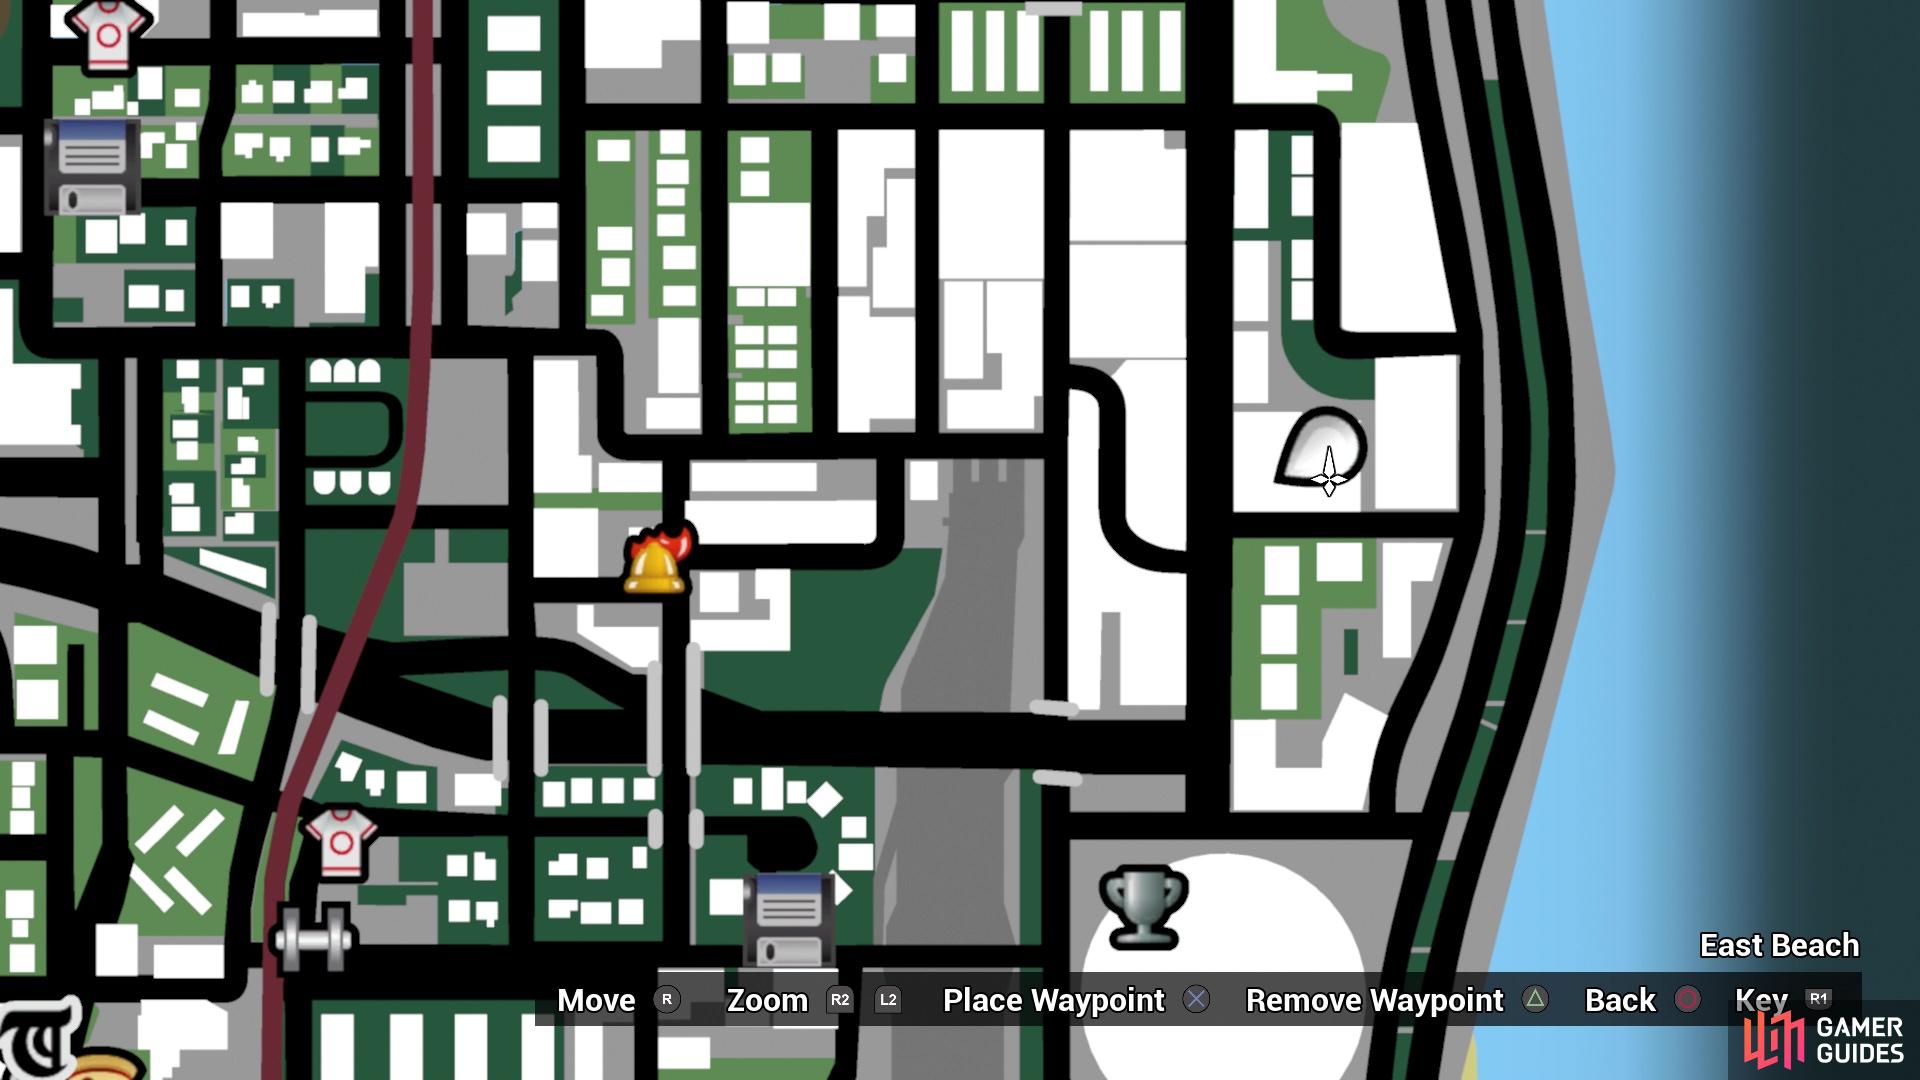 The location of the NRG-500 bike on the map